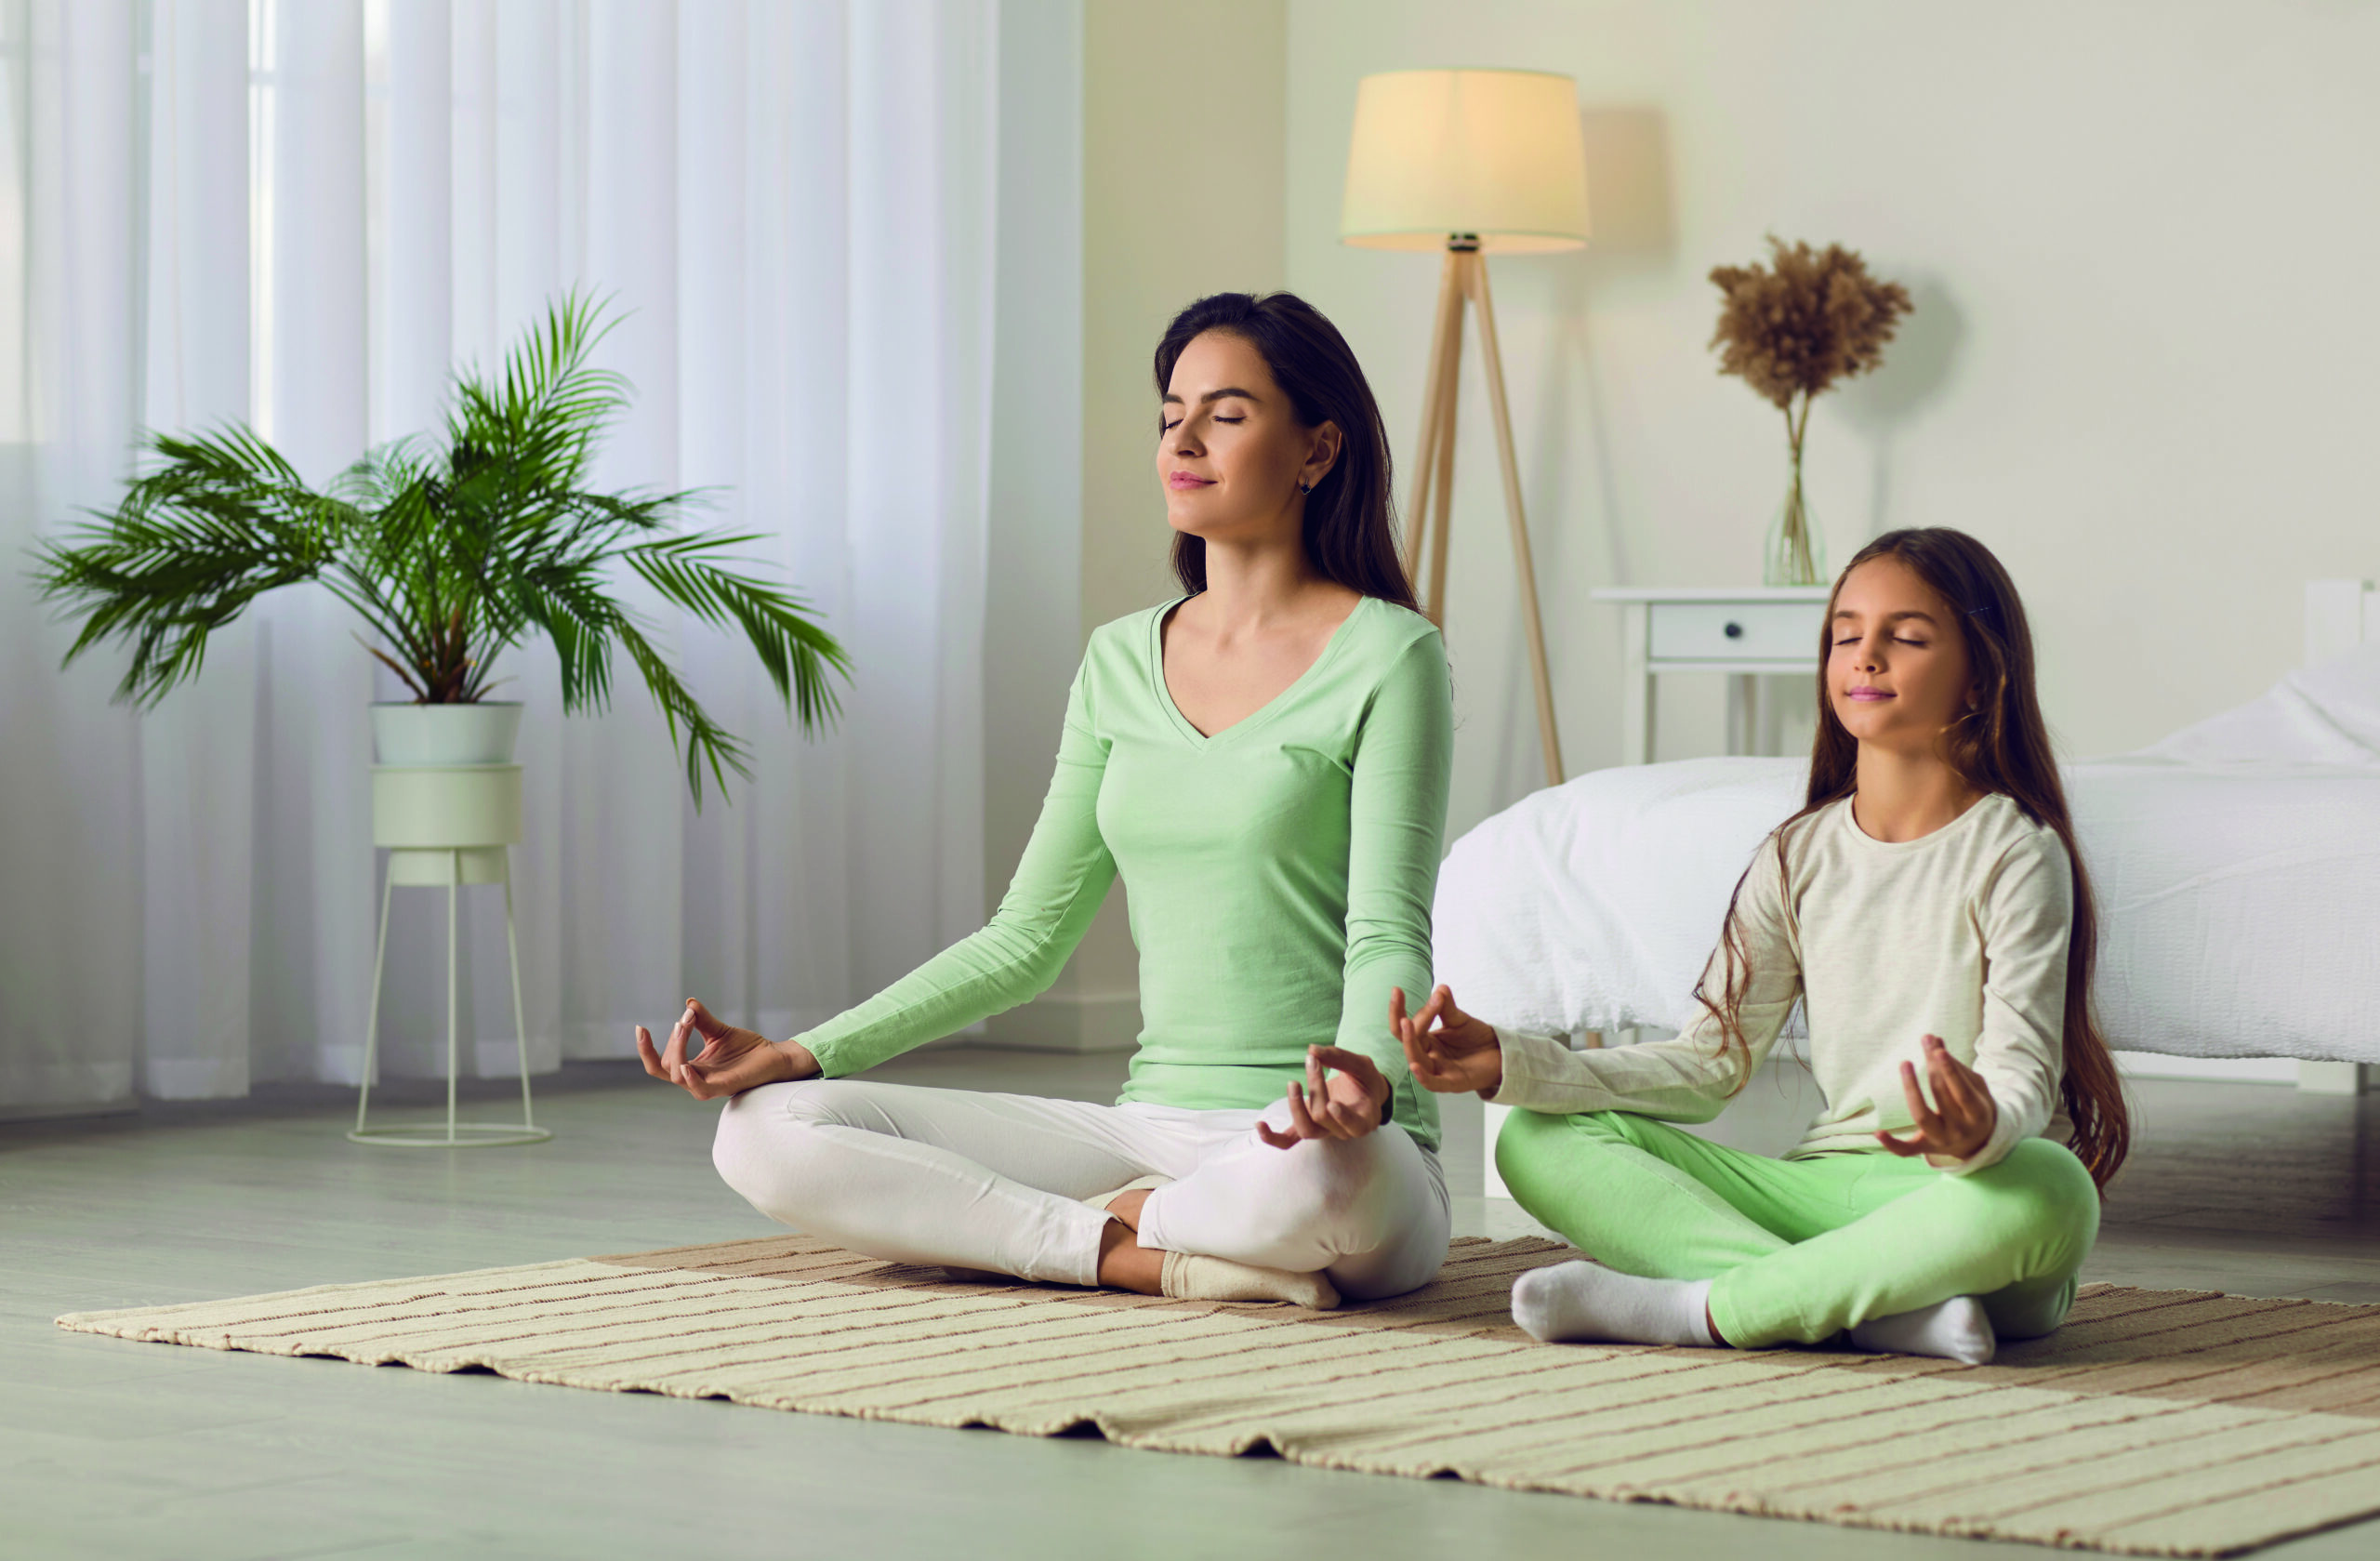 Family yoga. Beautiful young woman and her charming little daughter are smiling while doing yoga together at home. Family sits in lotus position on floor in living room. Mom teaches child to meditate.